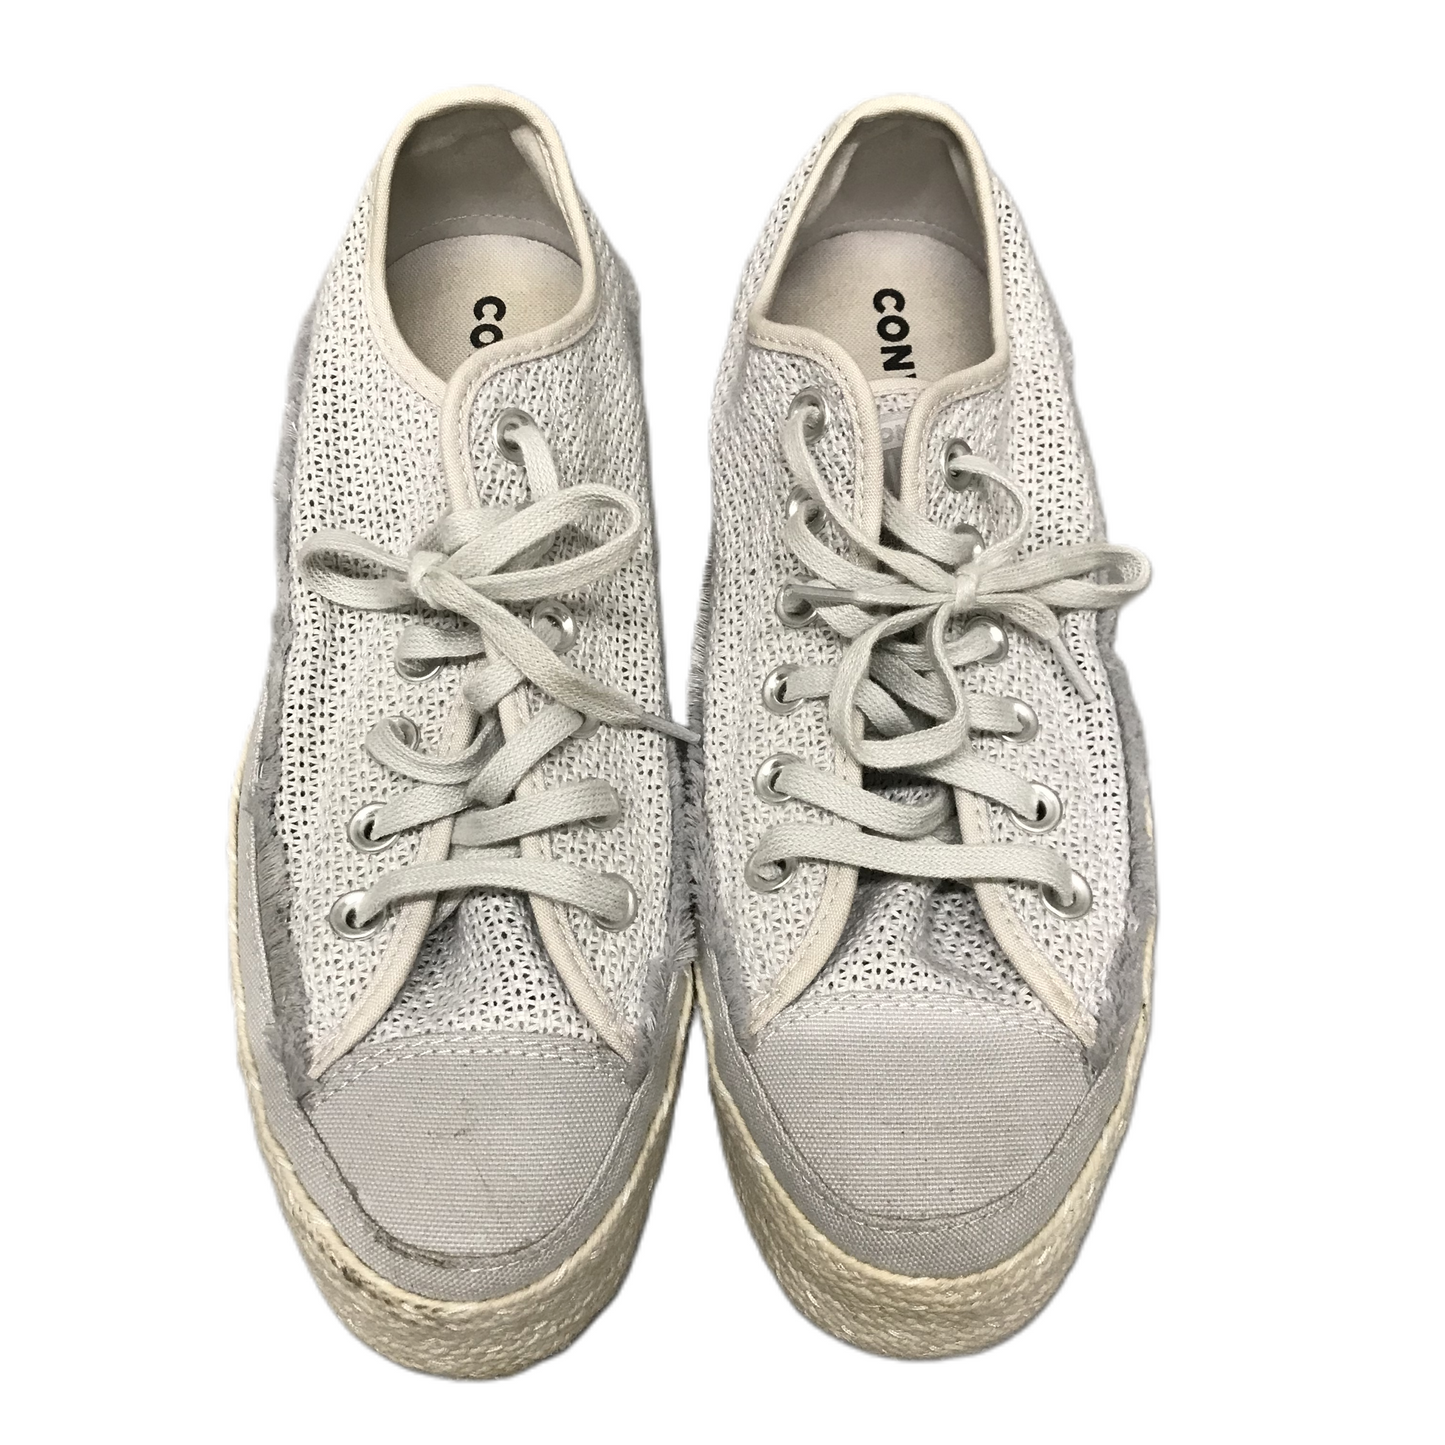 Grey Shoes Sneakers Platform By Converse, Size: 8